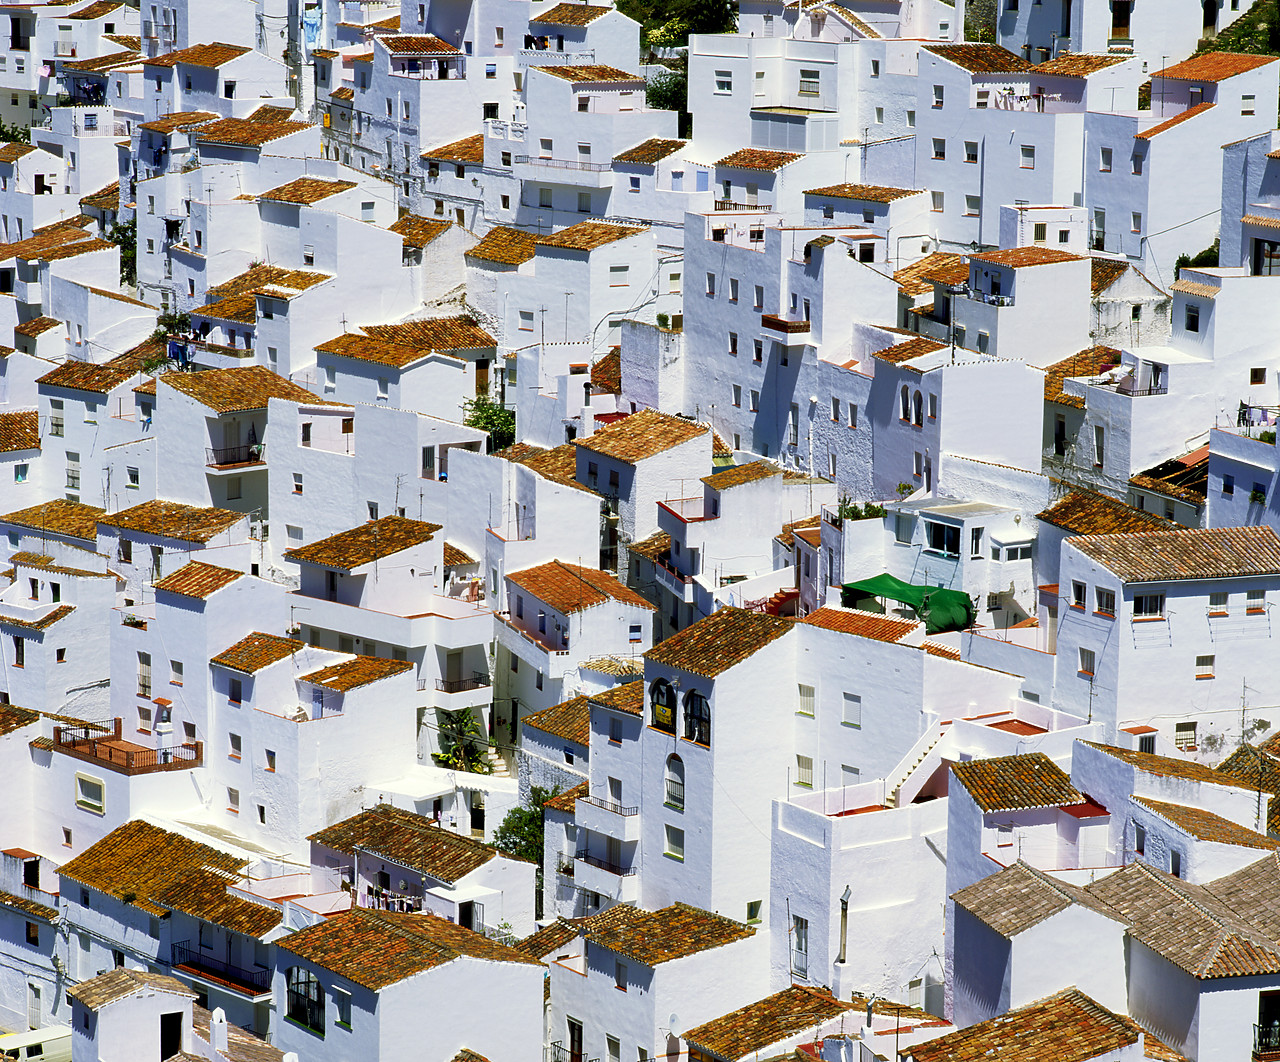 #200134-2 - White-Washed Village of Casares, Andalusia, Spain